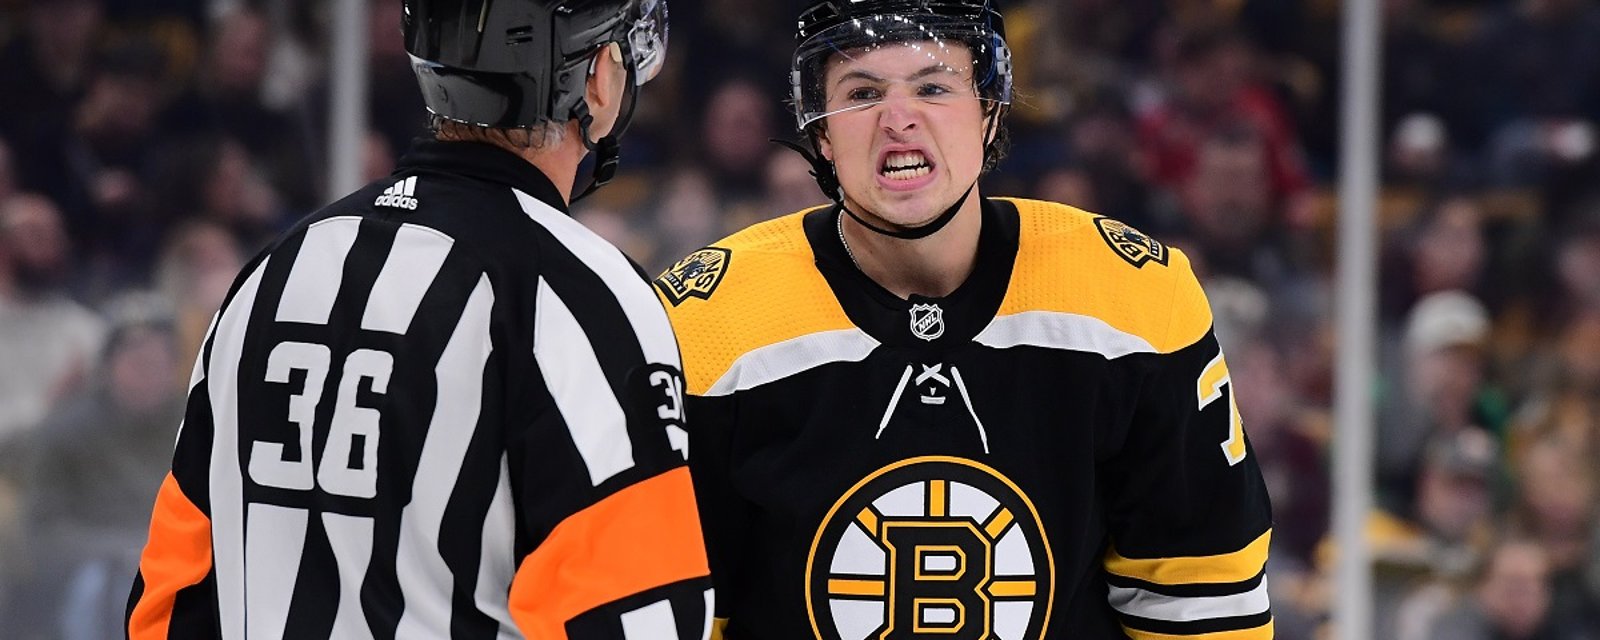 Former NHLer calls out the Bruins, says McAvoy should not be on the ice.